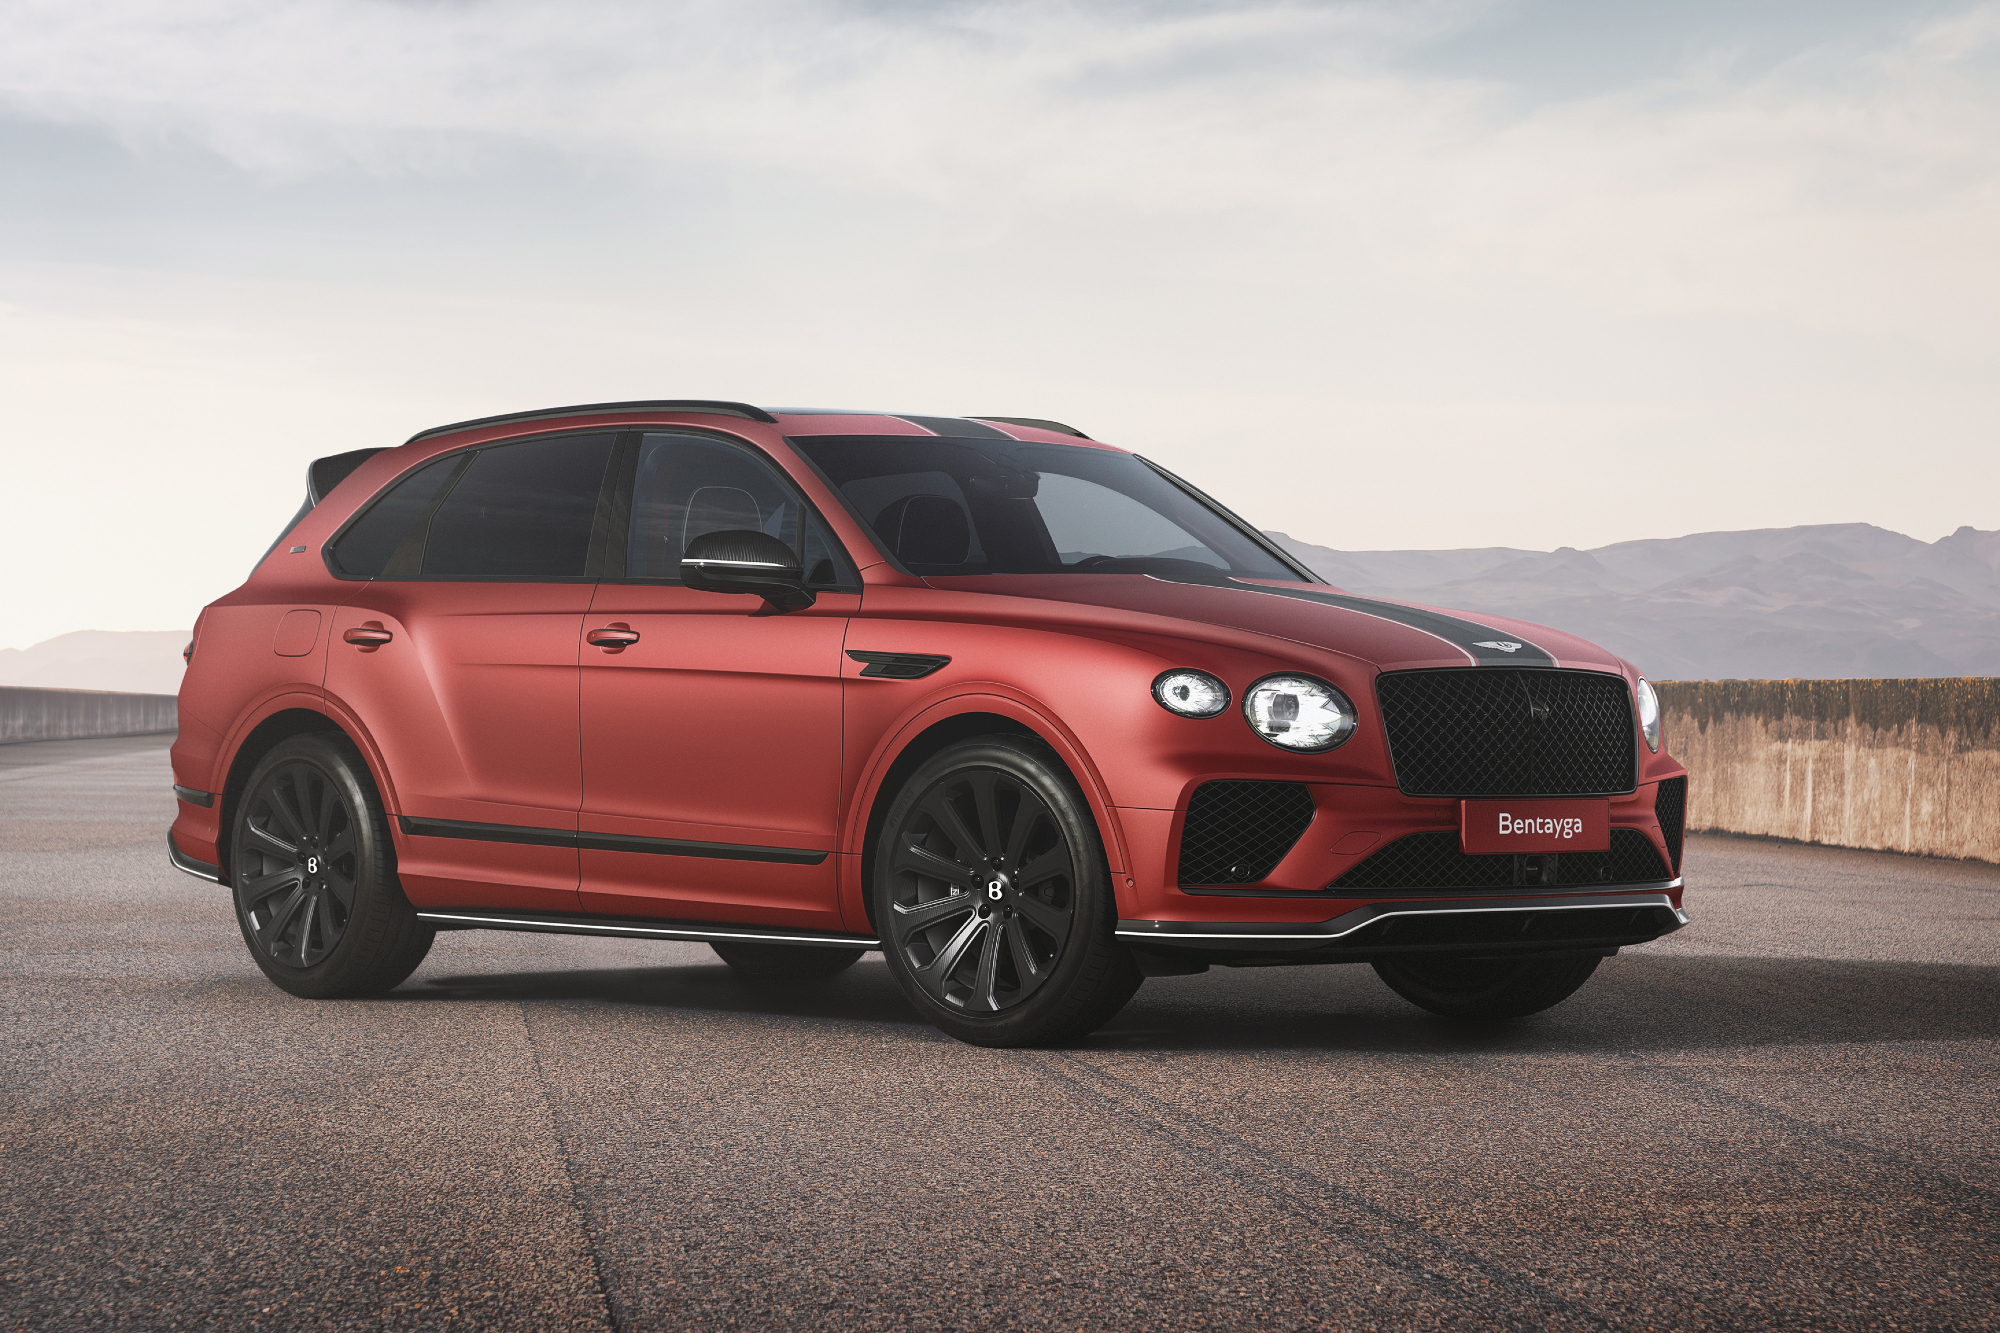 Bentayga Apex Edition limited edition of just 20 cars right front three-quarter view parked on a dirt track.